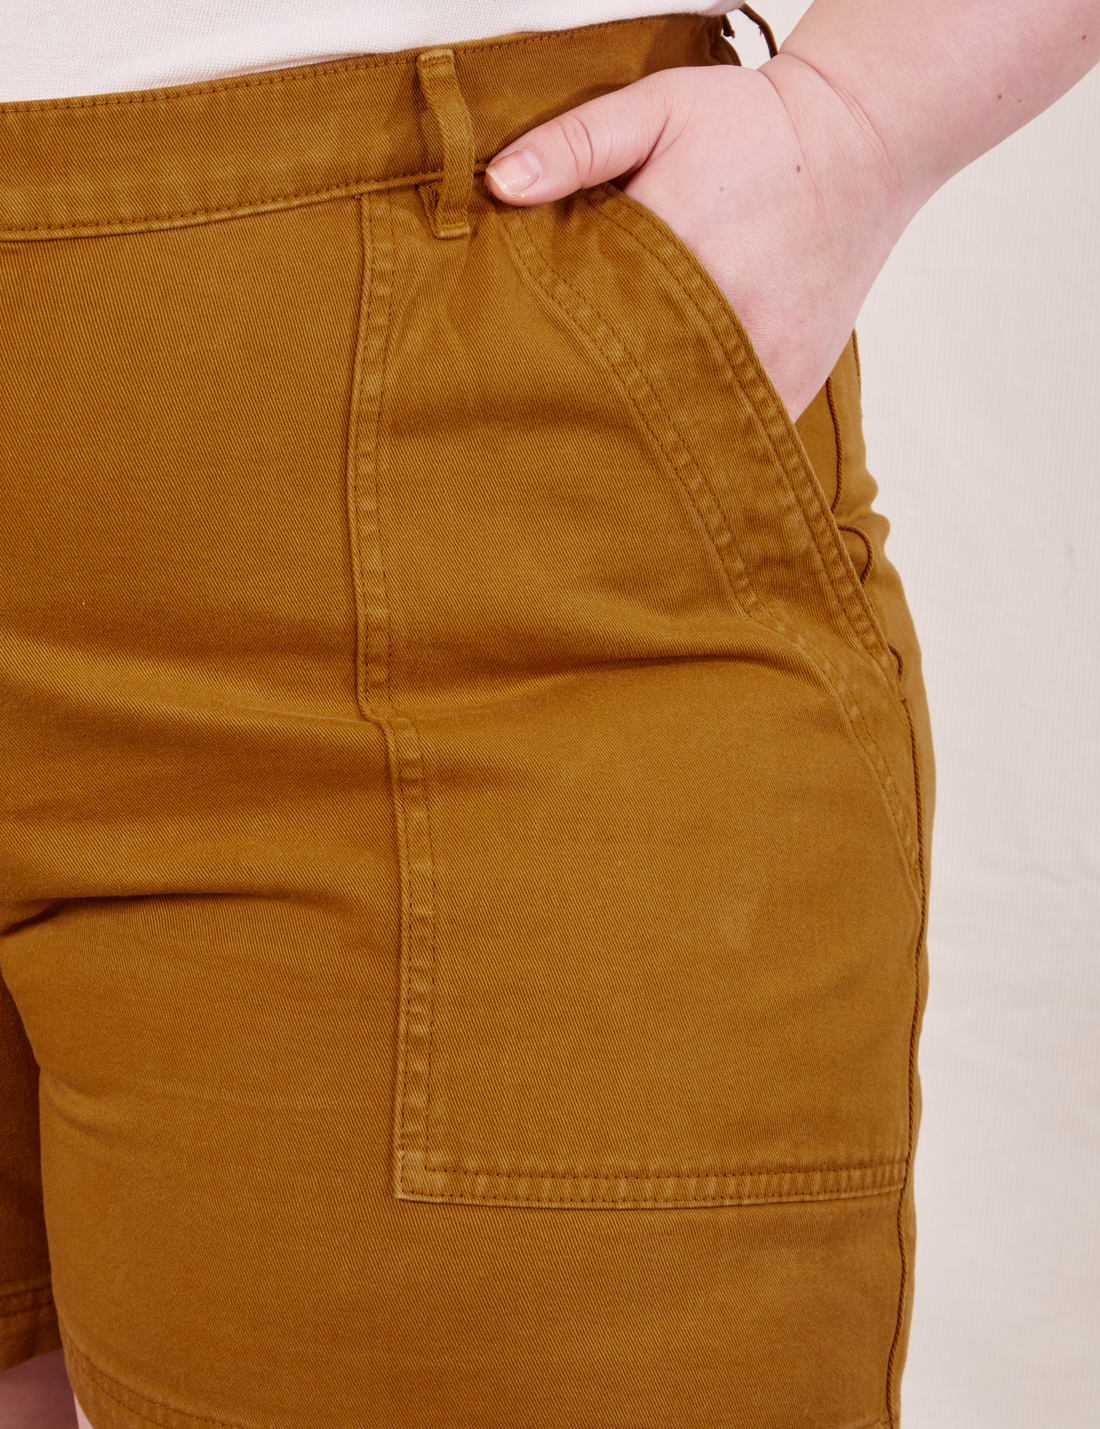 Ashley has her hand in the front pocket of the Classic Work Shorts in Spicy Mustard